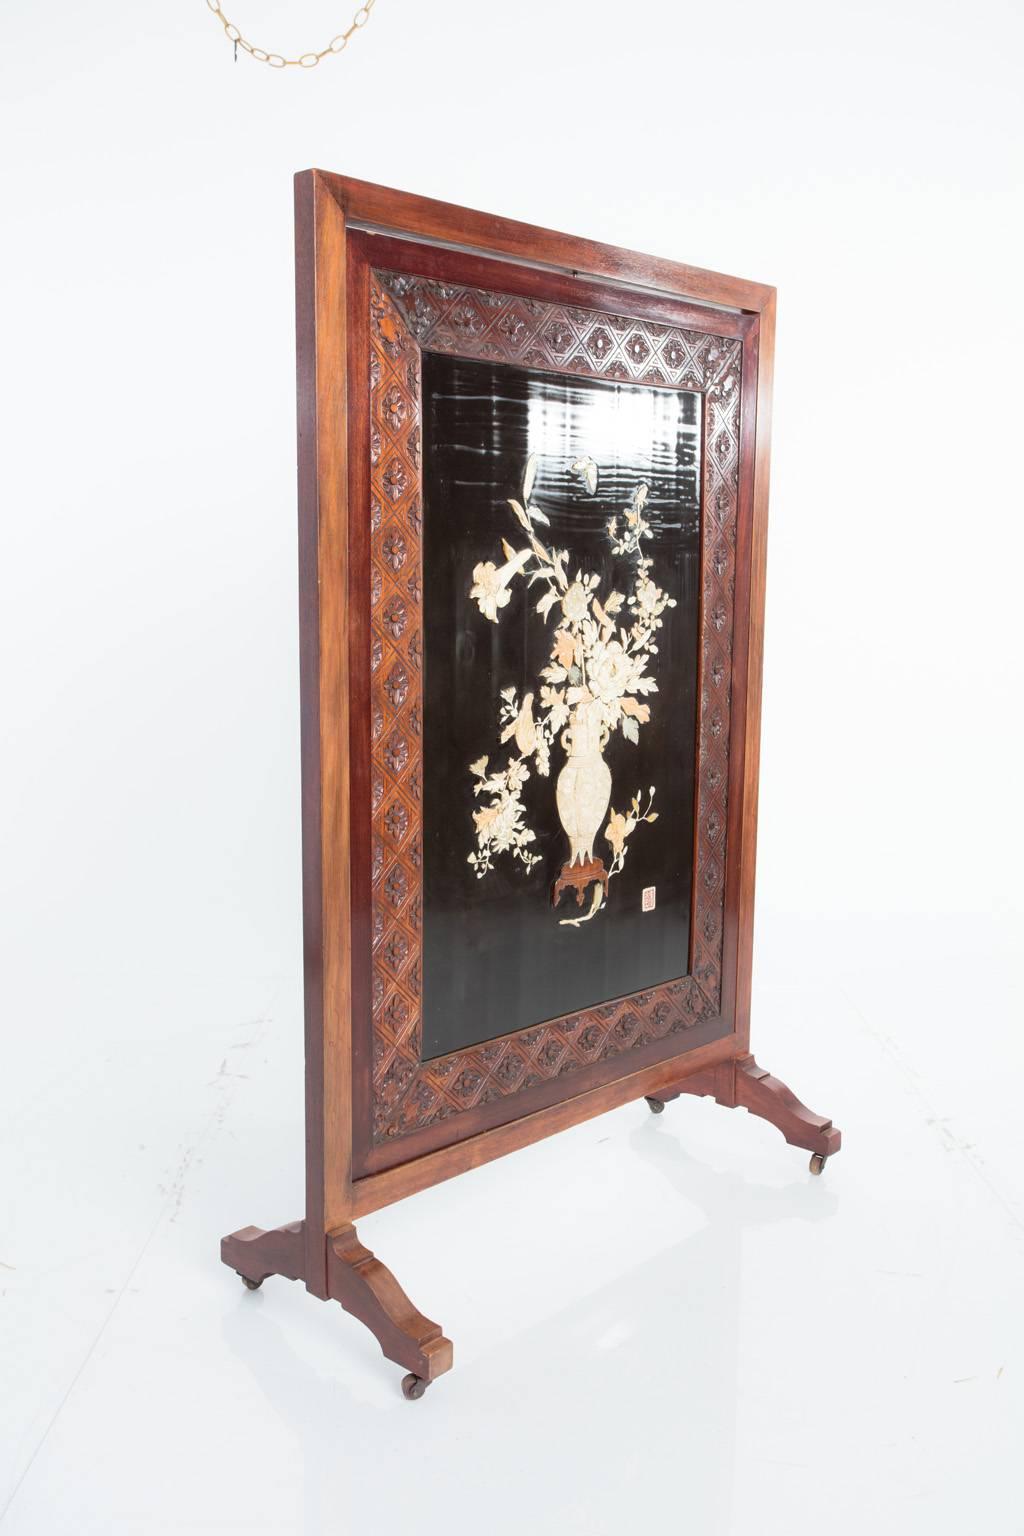 Early 19th century Asian floor screen with intricate mother-of-pearl and bone details. At the center of the panel sits a spray of expertly carved flowers with lively birds and butterflies peeking among the petals. A signature is similarly carved.